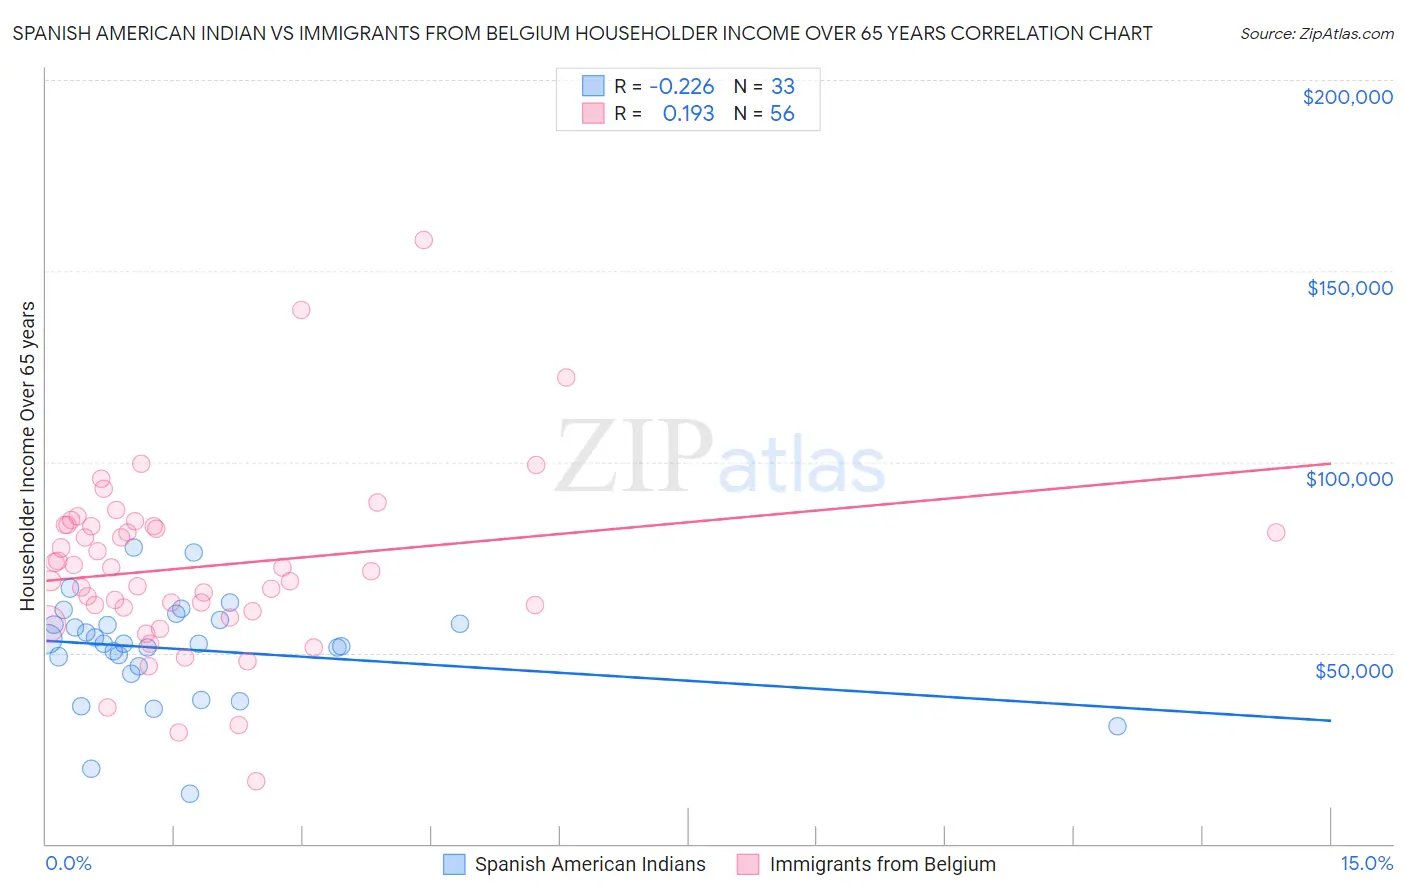 Spanish American Indian vs Immigrants from Belgium Householder Income Over 65 years